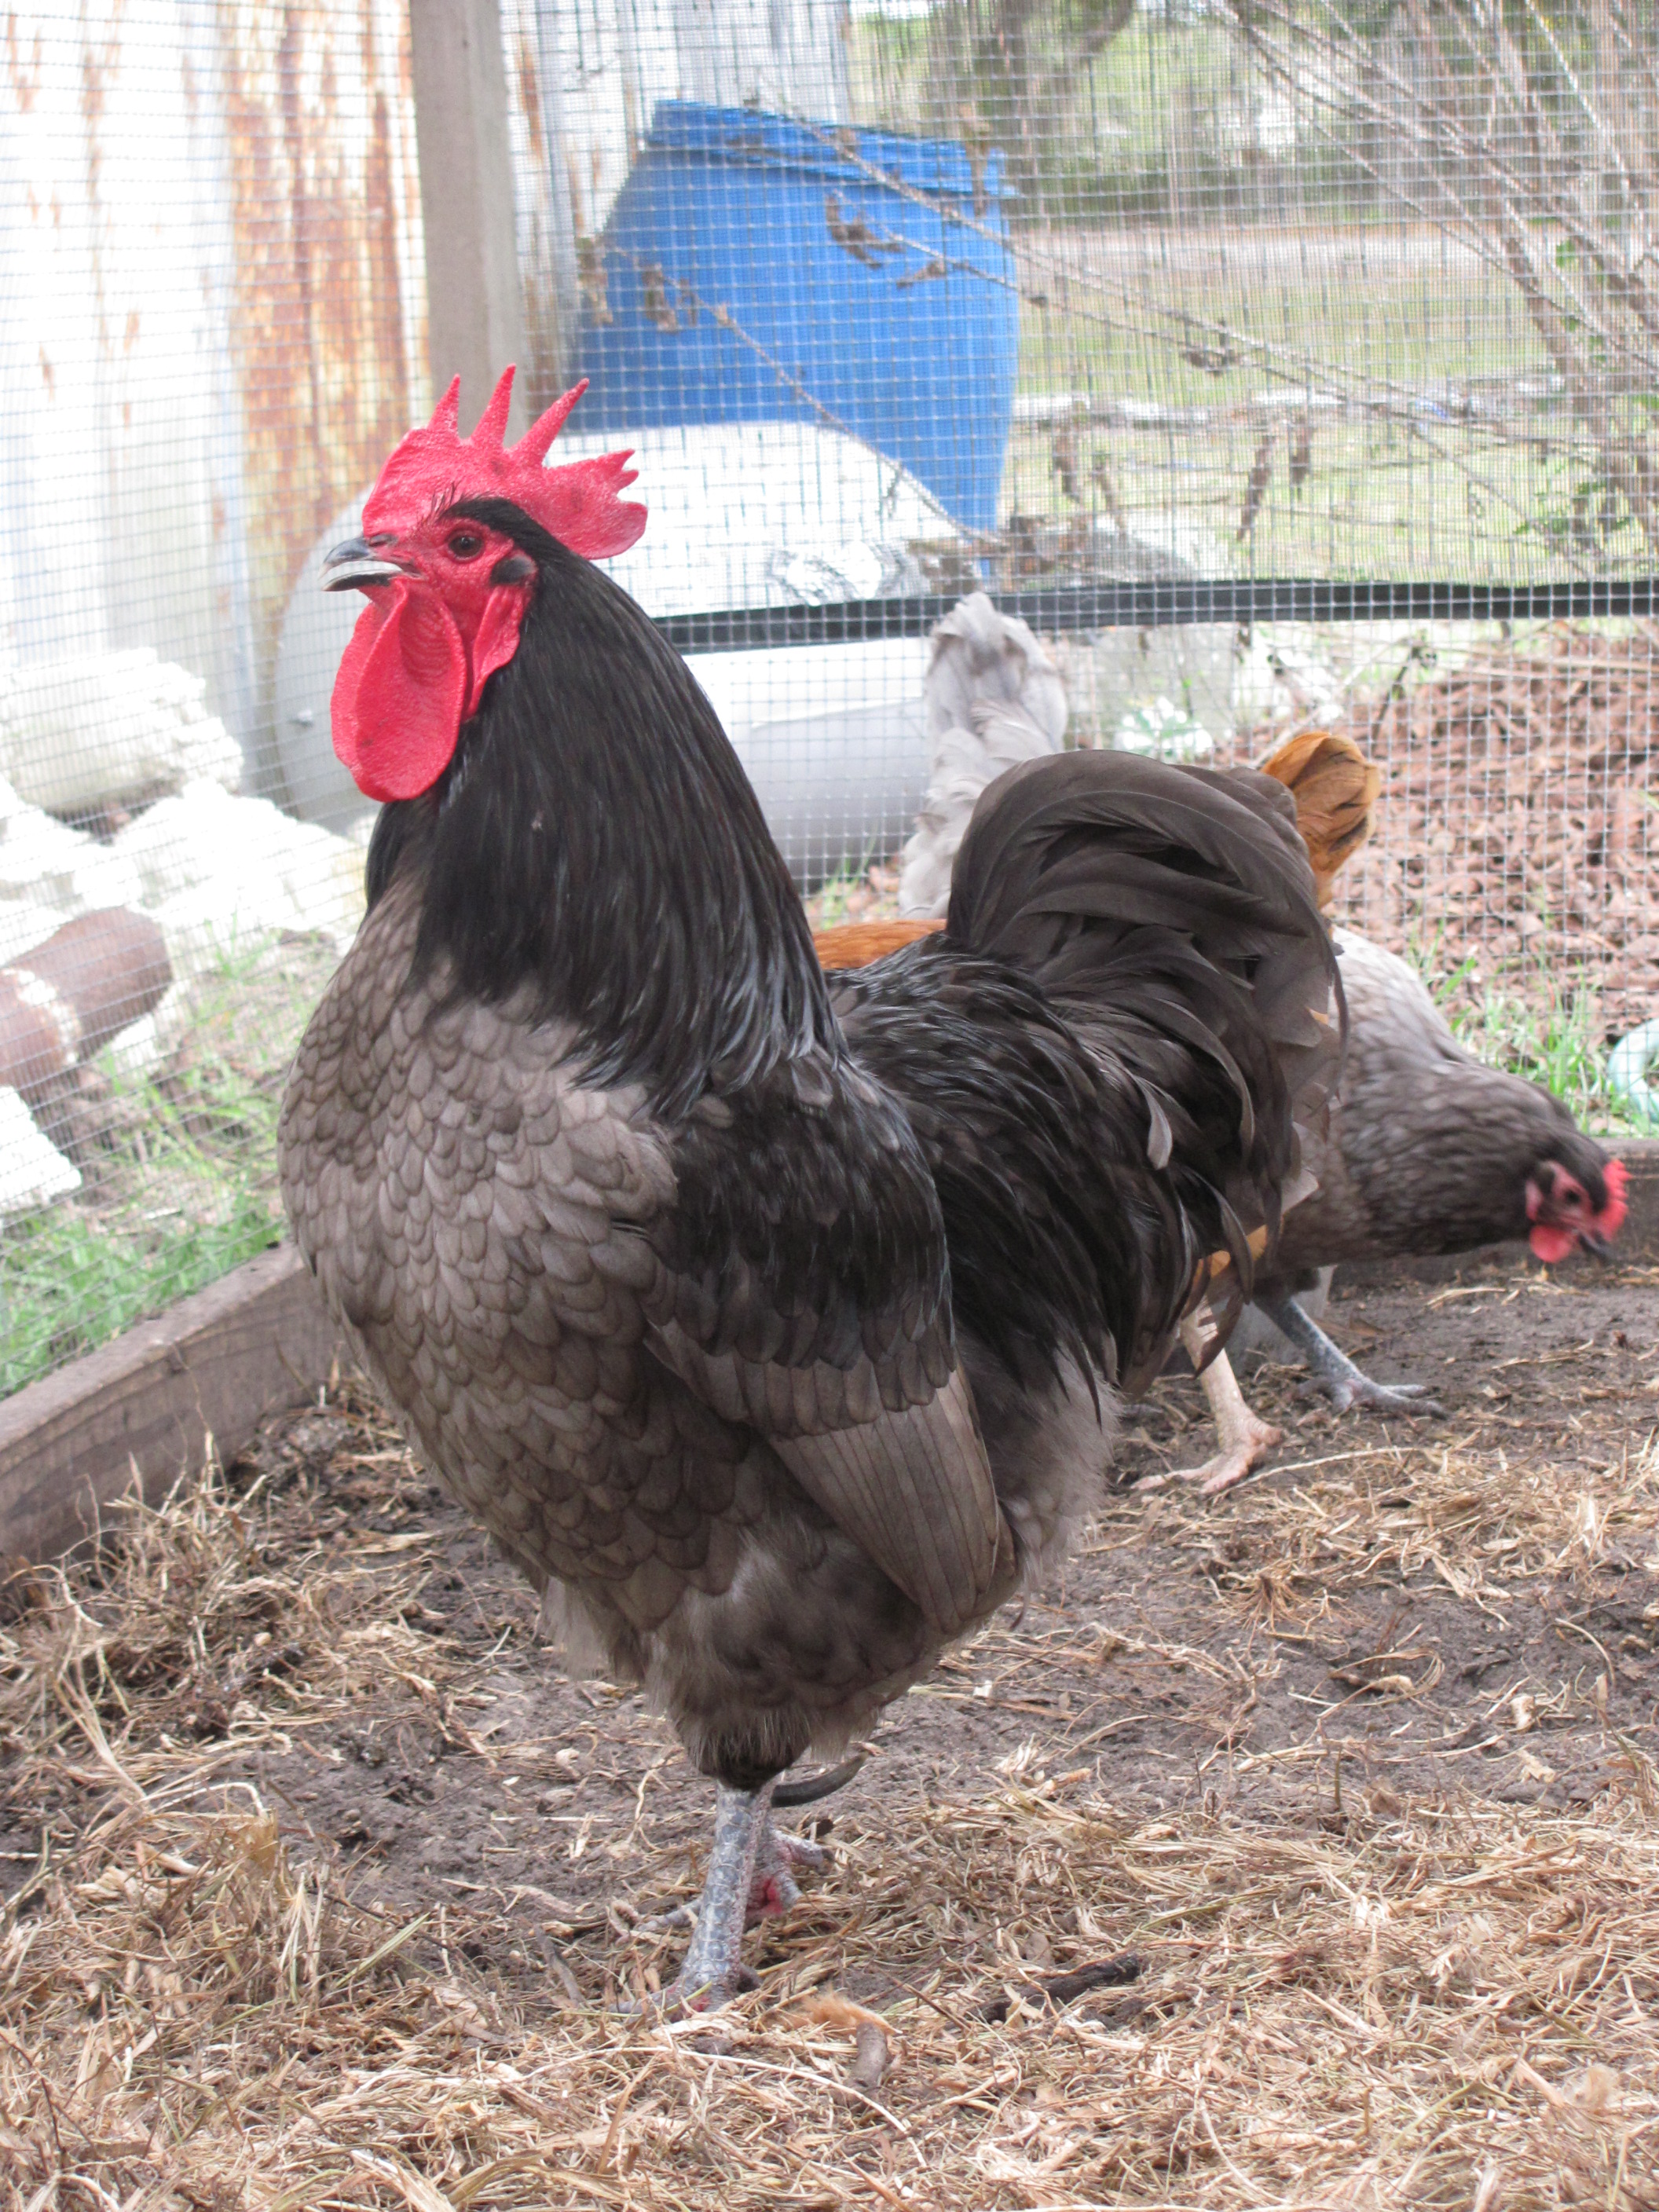 Marcus Aurelius our Blue Marans Rooster
(Because he thinks he's a mighty general and emperor of all of Rome.  He's not the best behaved fellow, but he's definately the best looking rooster we've owned.  He's more blue in person, my camera doesn't do him justice.)